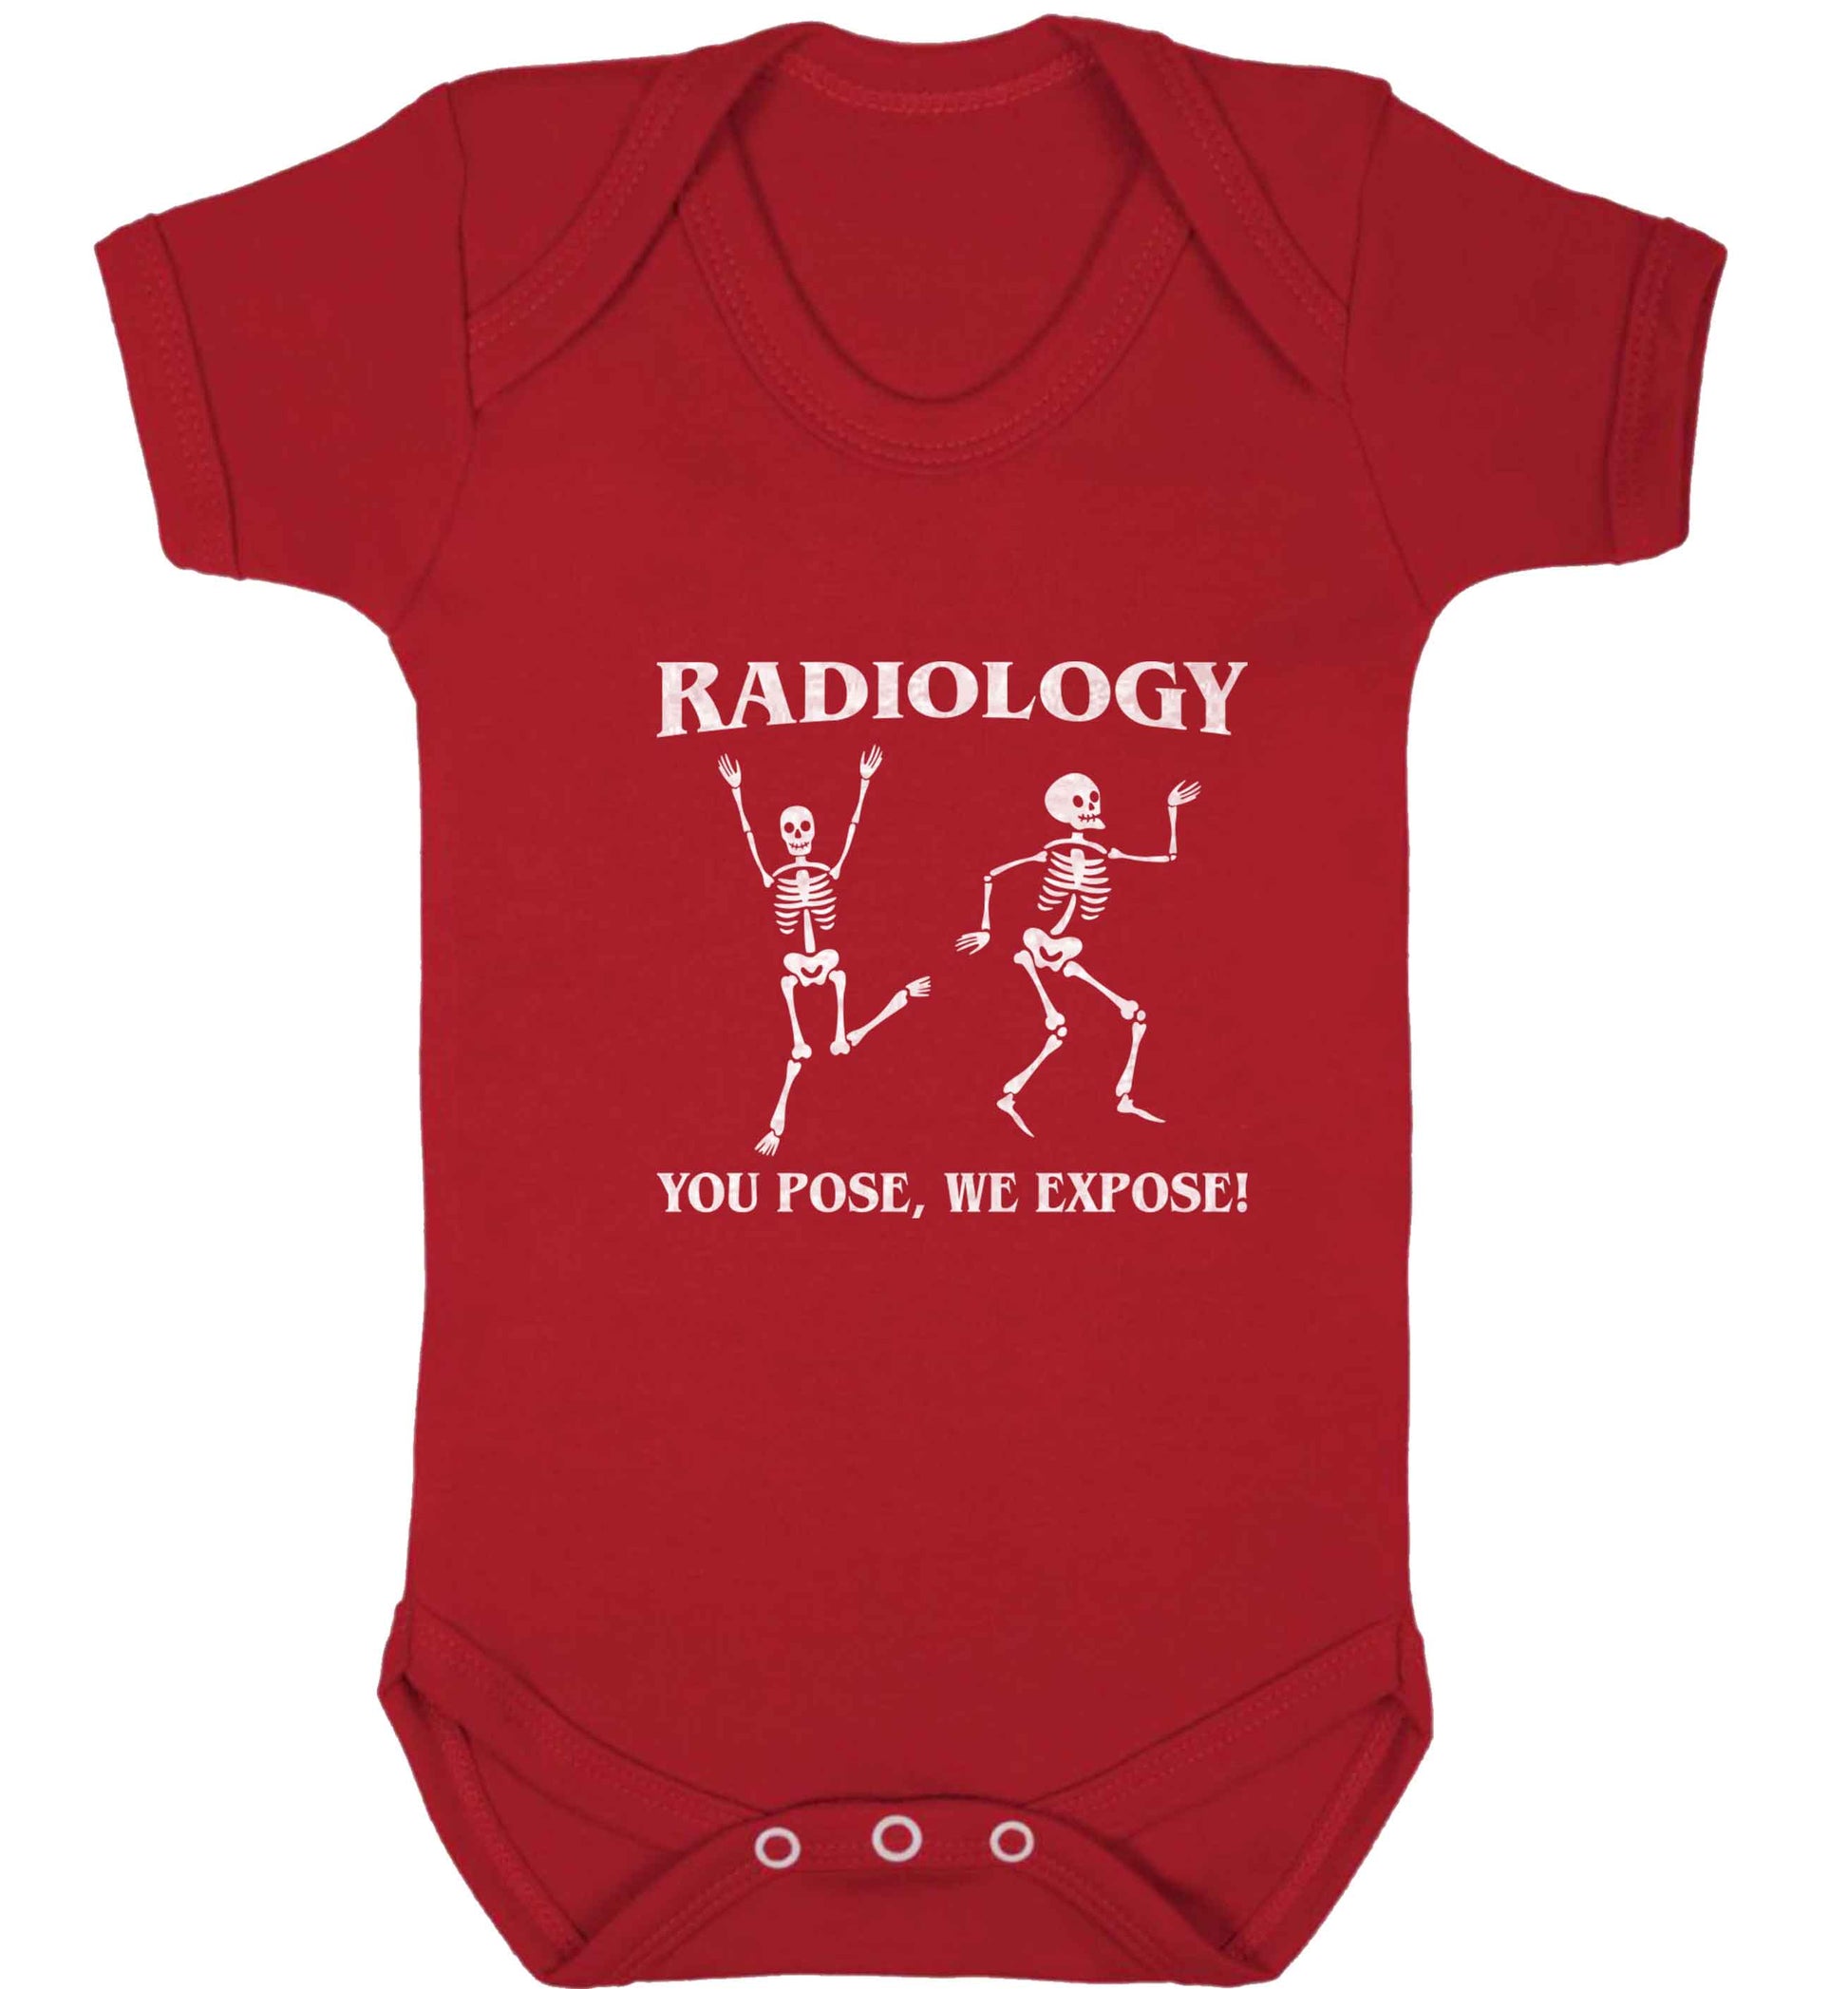 Radiology you pose we expose baby vest red 18-24 months